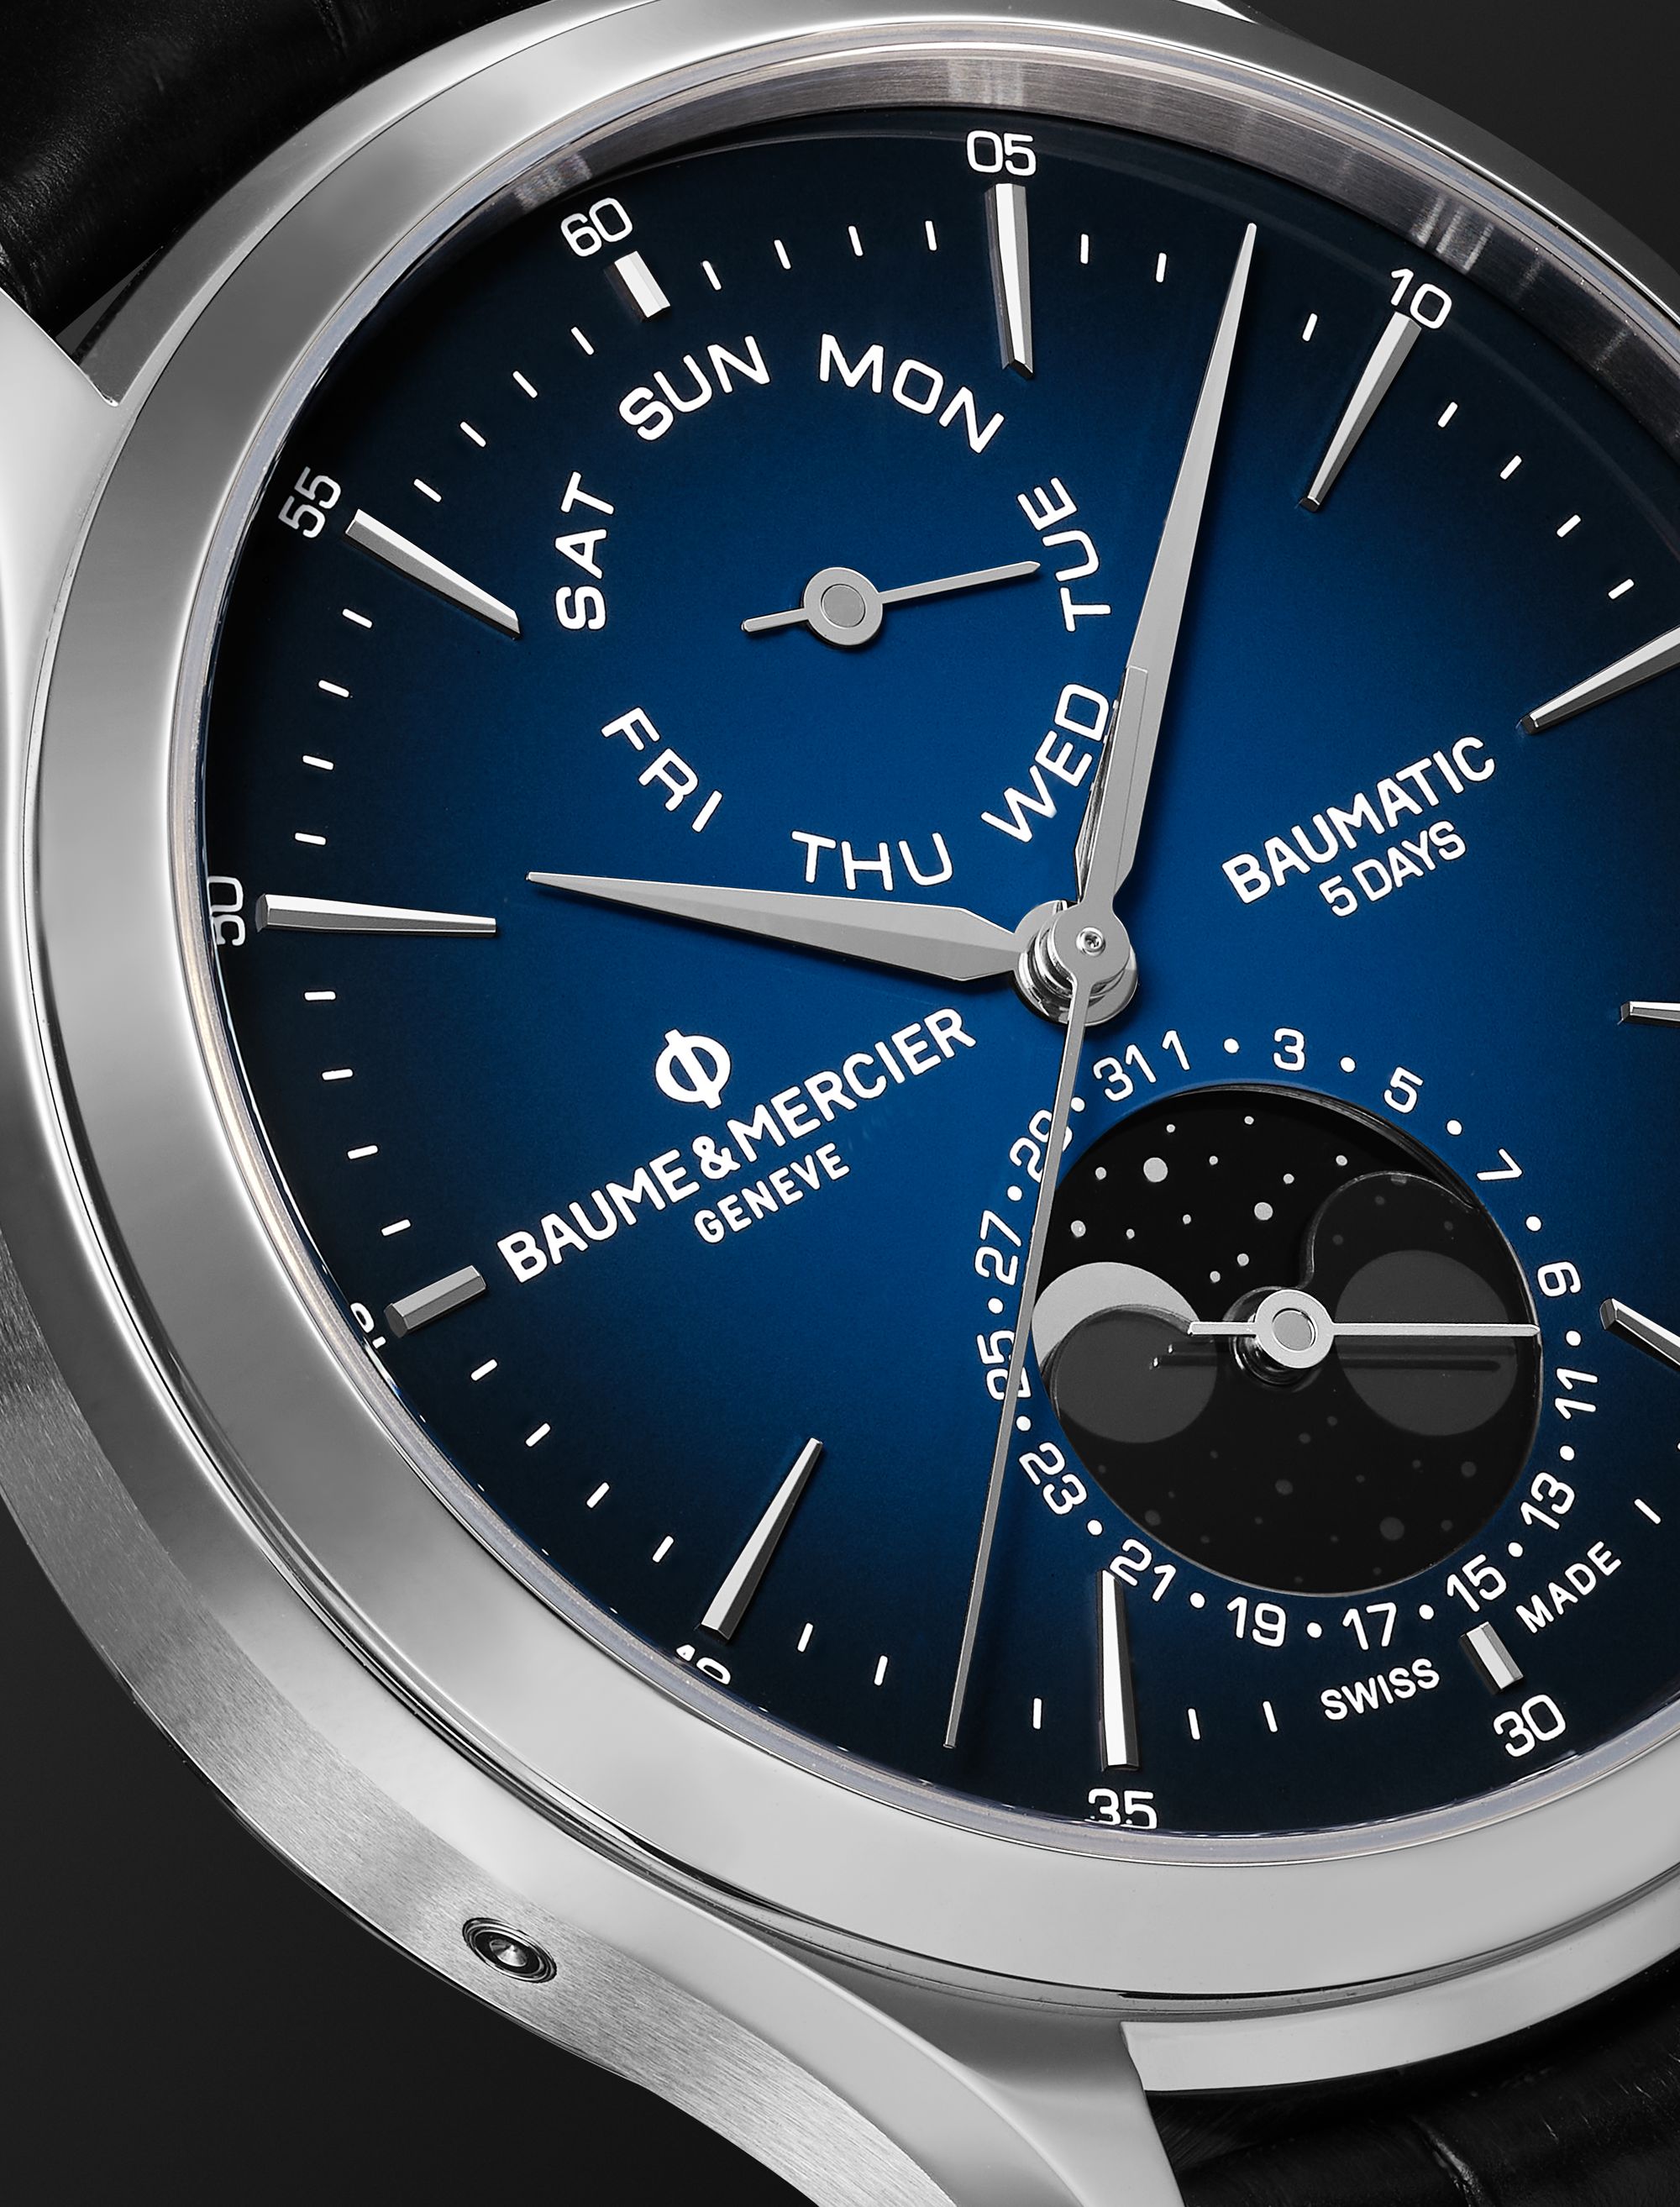 BAUME & MERCIER Clifton Baumatic Automatic Day-Date Moon-Phase 42mm Steel and Alligator Watch , Ref. No. 10593